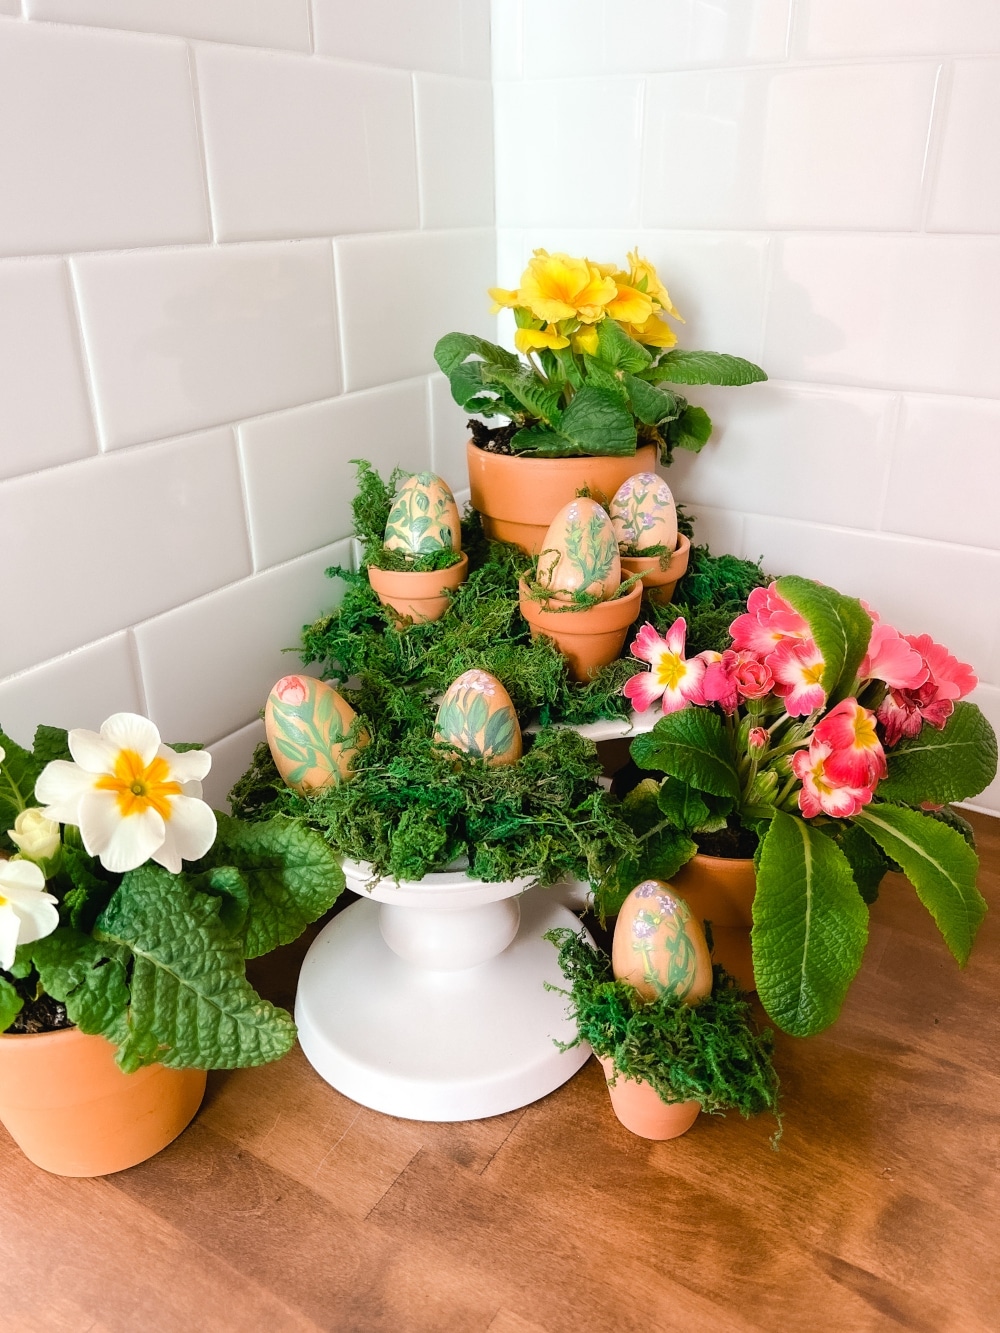 Hand Painted Herb Eggs Centerpiece. Create a sweet herb centerpiece by painting wooden eggs with different herbs!